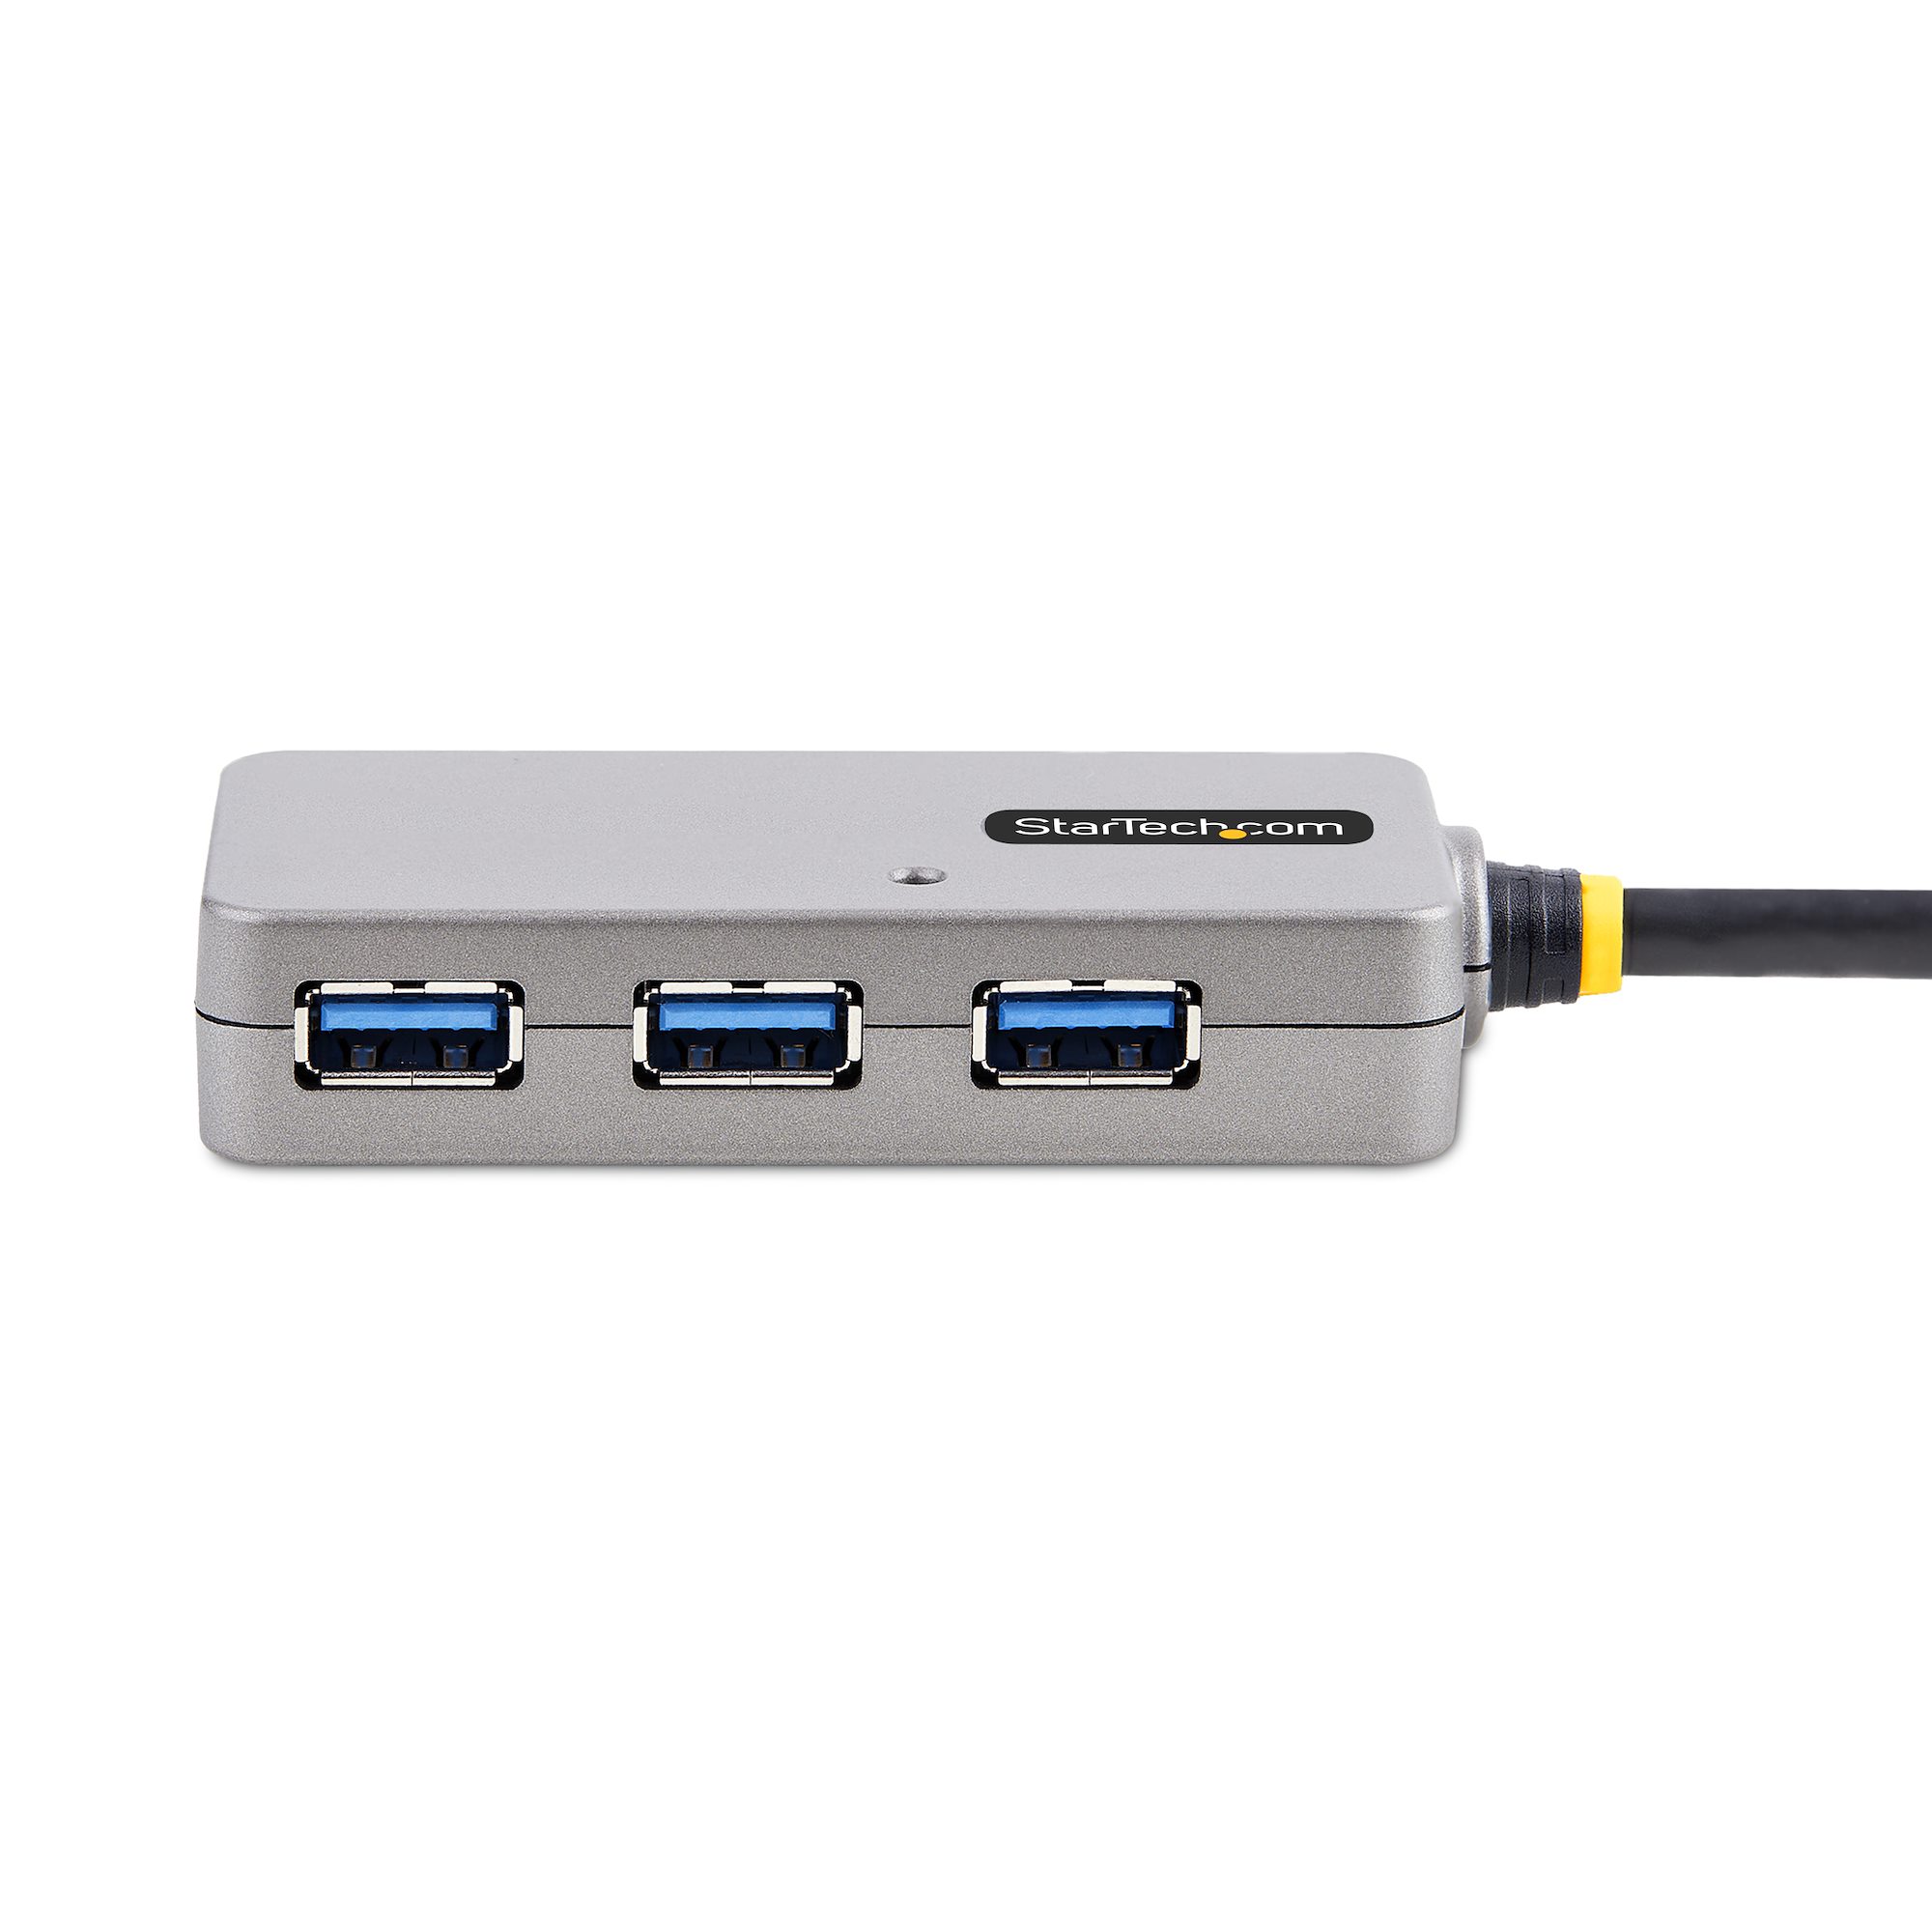 USB Extender Hub, 10m USB 3.0 Extension Cable with 4-Port USB-A Hub,  Active/Bus Powered USB Repeater Cable, Optional 20W Power Supply Included,  ESD